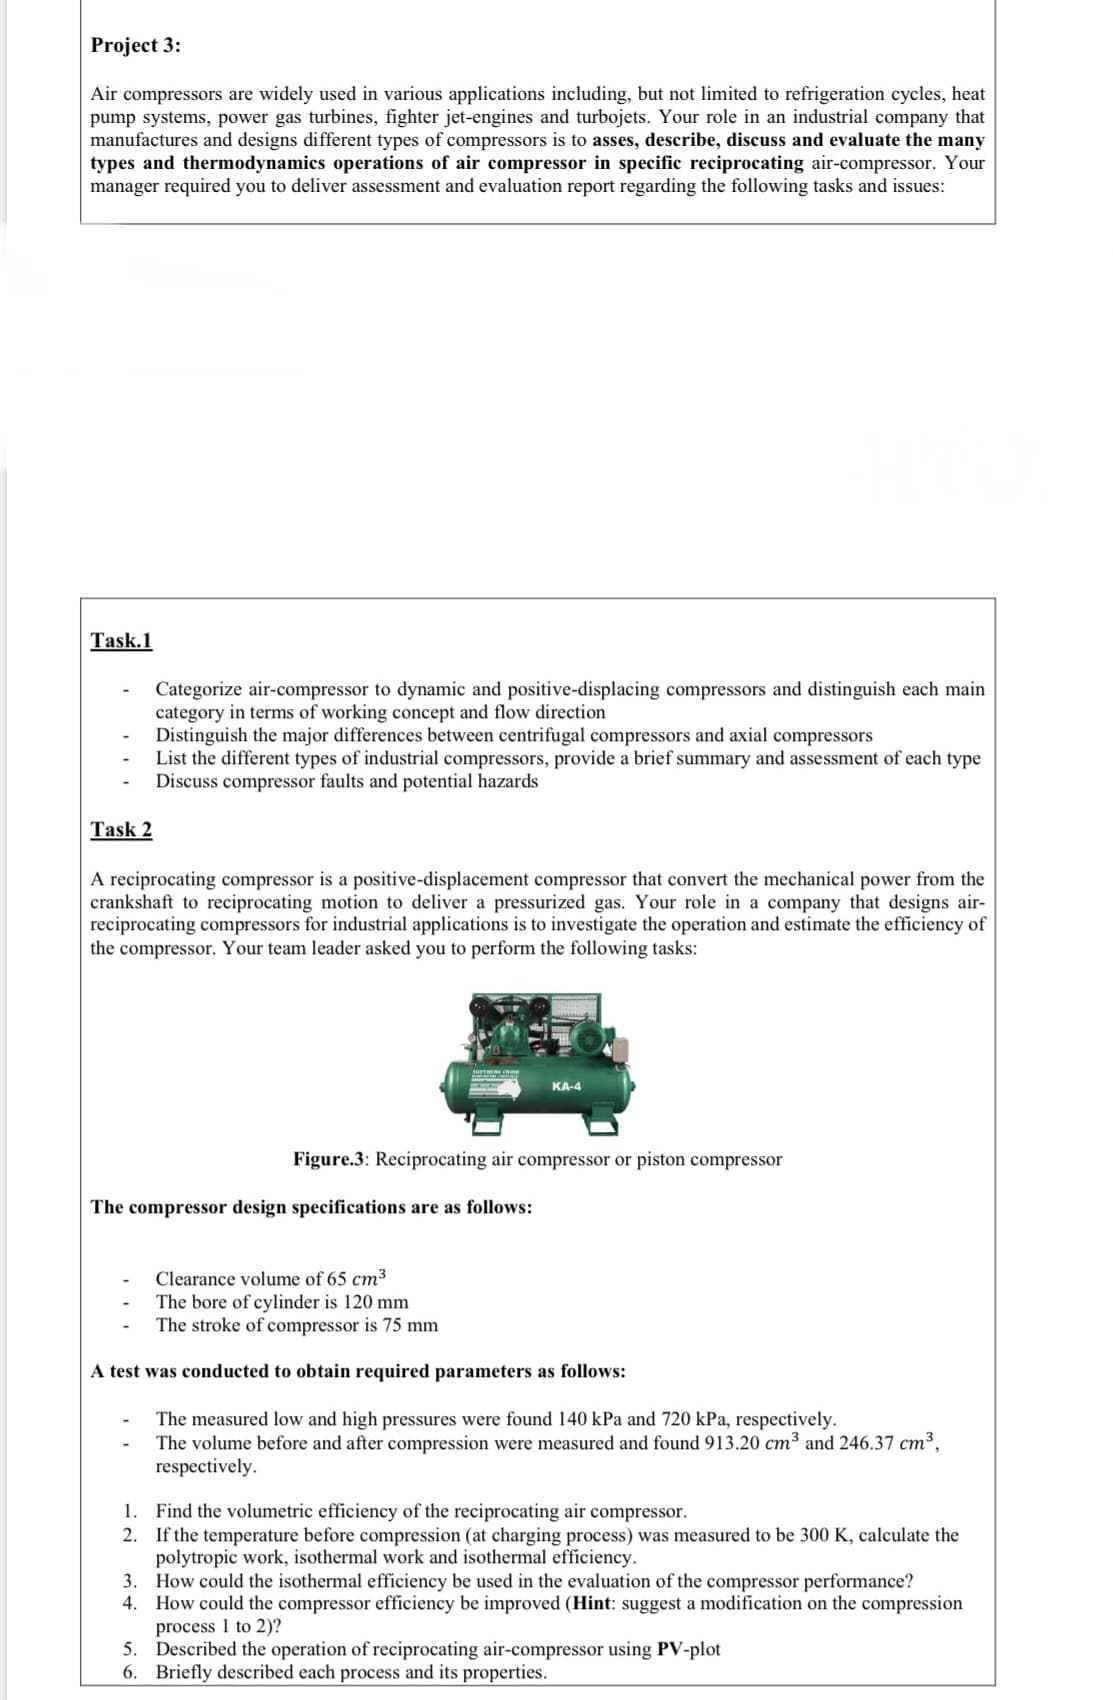 Categorize air-compressor to dynamic and positive-displacing compressors and distinguish each main
category in terms of working concept and flow direction
Distinguish the major differences between centrifugal compressors and axial compressors
List the different types of industrial compressors, provide a brief summary and assessment of each type
